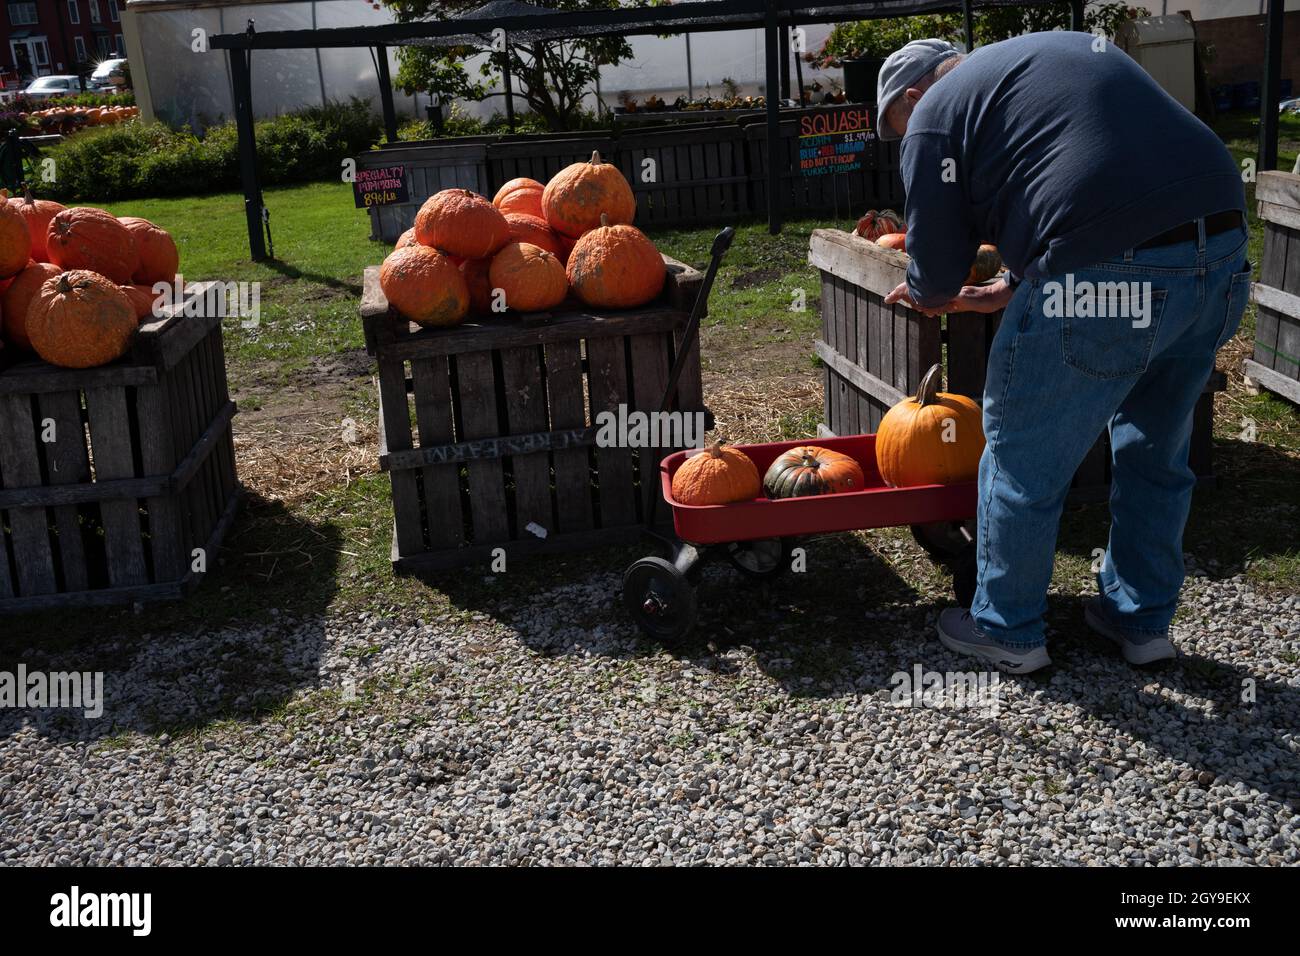 This fellow must be a fan of pumpkin pies.  Pumpkin pies are his favorite. When pumpkins are in season he buys as many as he can to make pies. Stock Photo